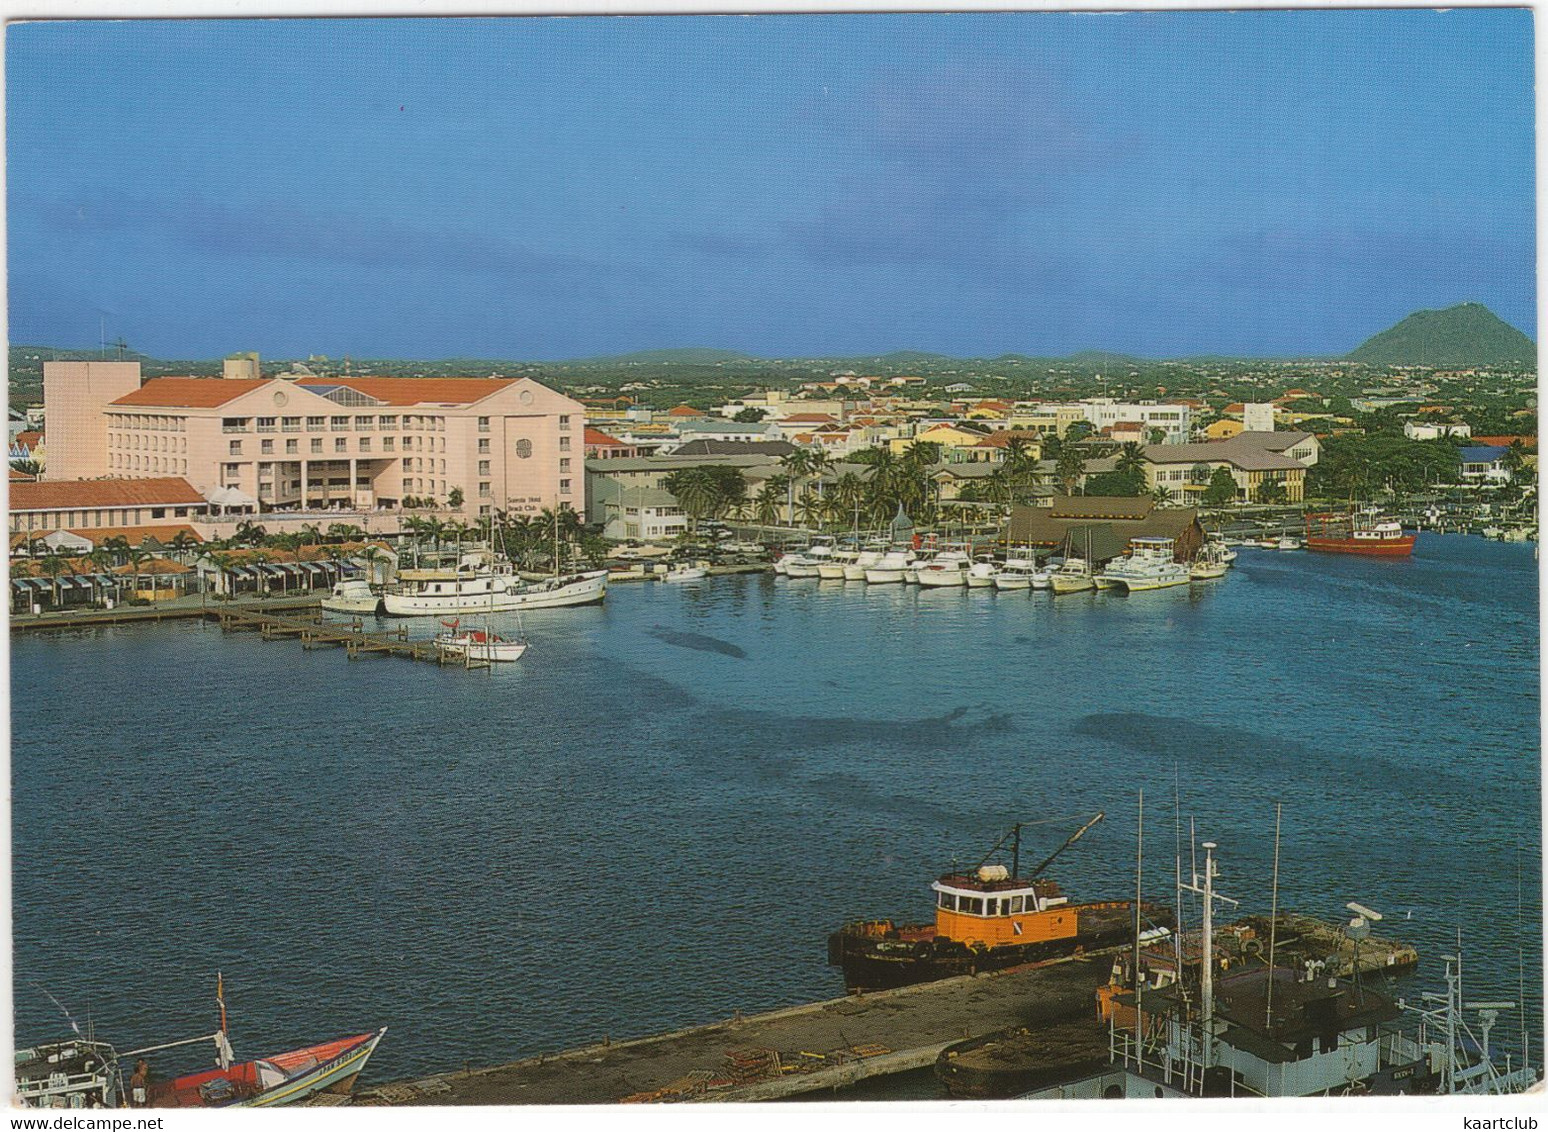 Aruba - Oranjestad At The Harbour Sight With The 'Sonesta' Hotel And The 'Ball' Restaurant - Boats/Ships - Aruba